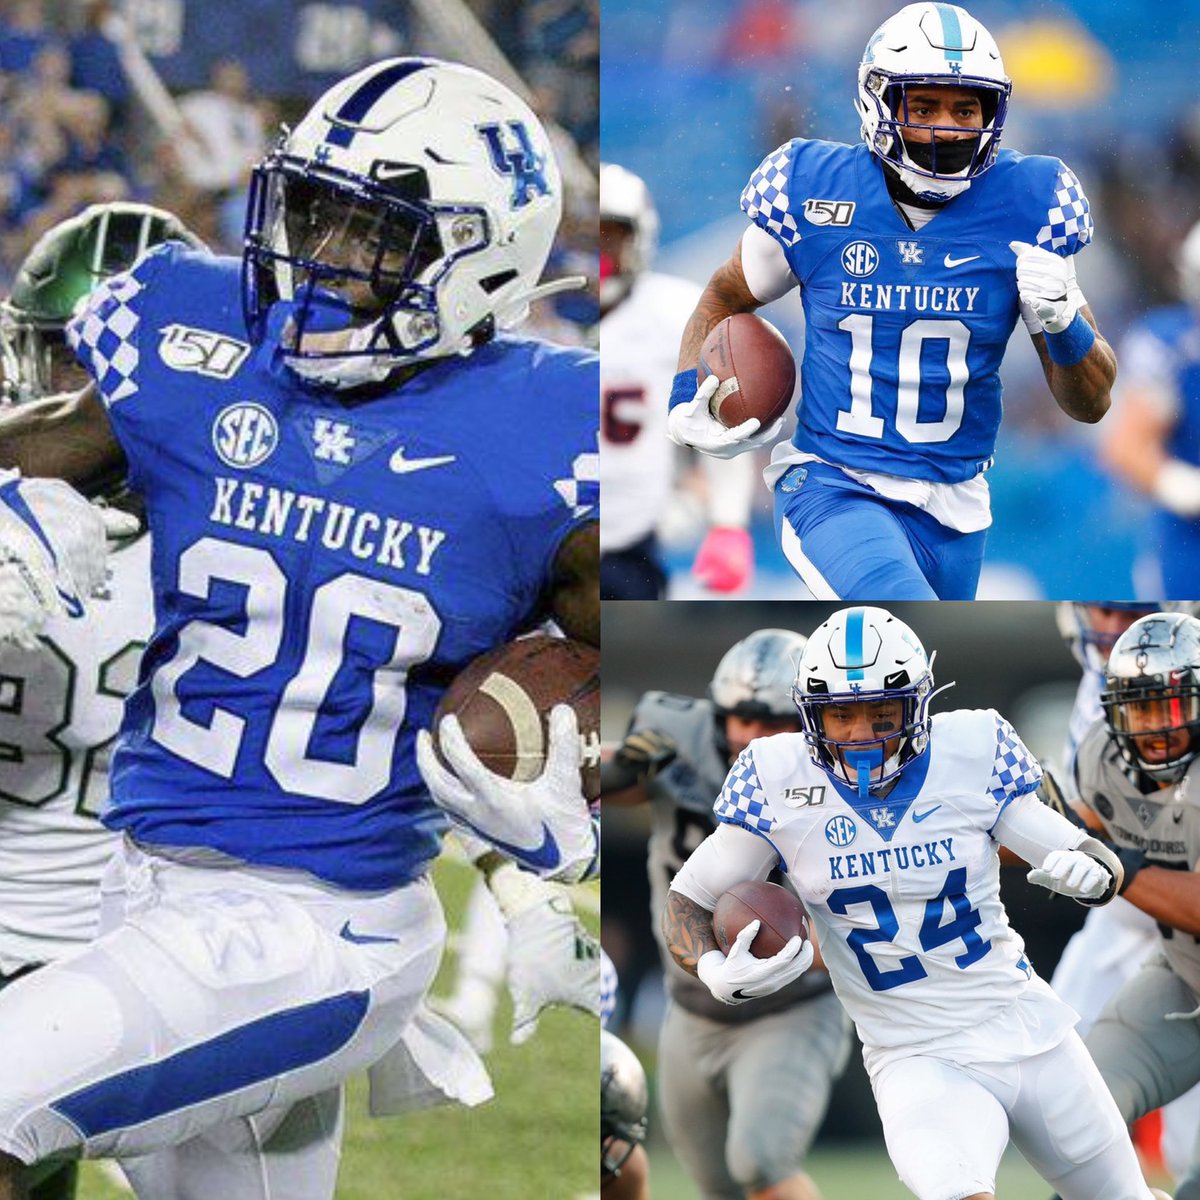 Now let’s factor in the run-game, which UK led the nation in last seasonGranted, Lynn won’t be running the read option on every playBut UK’s RB core consists of 3 absolute studs — AJ, Smoke, & ChrisWith dual-threat Terry back behind center, this rush-attack will be INSANE